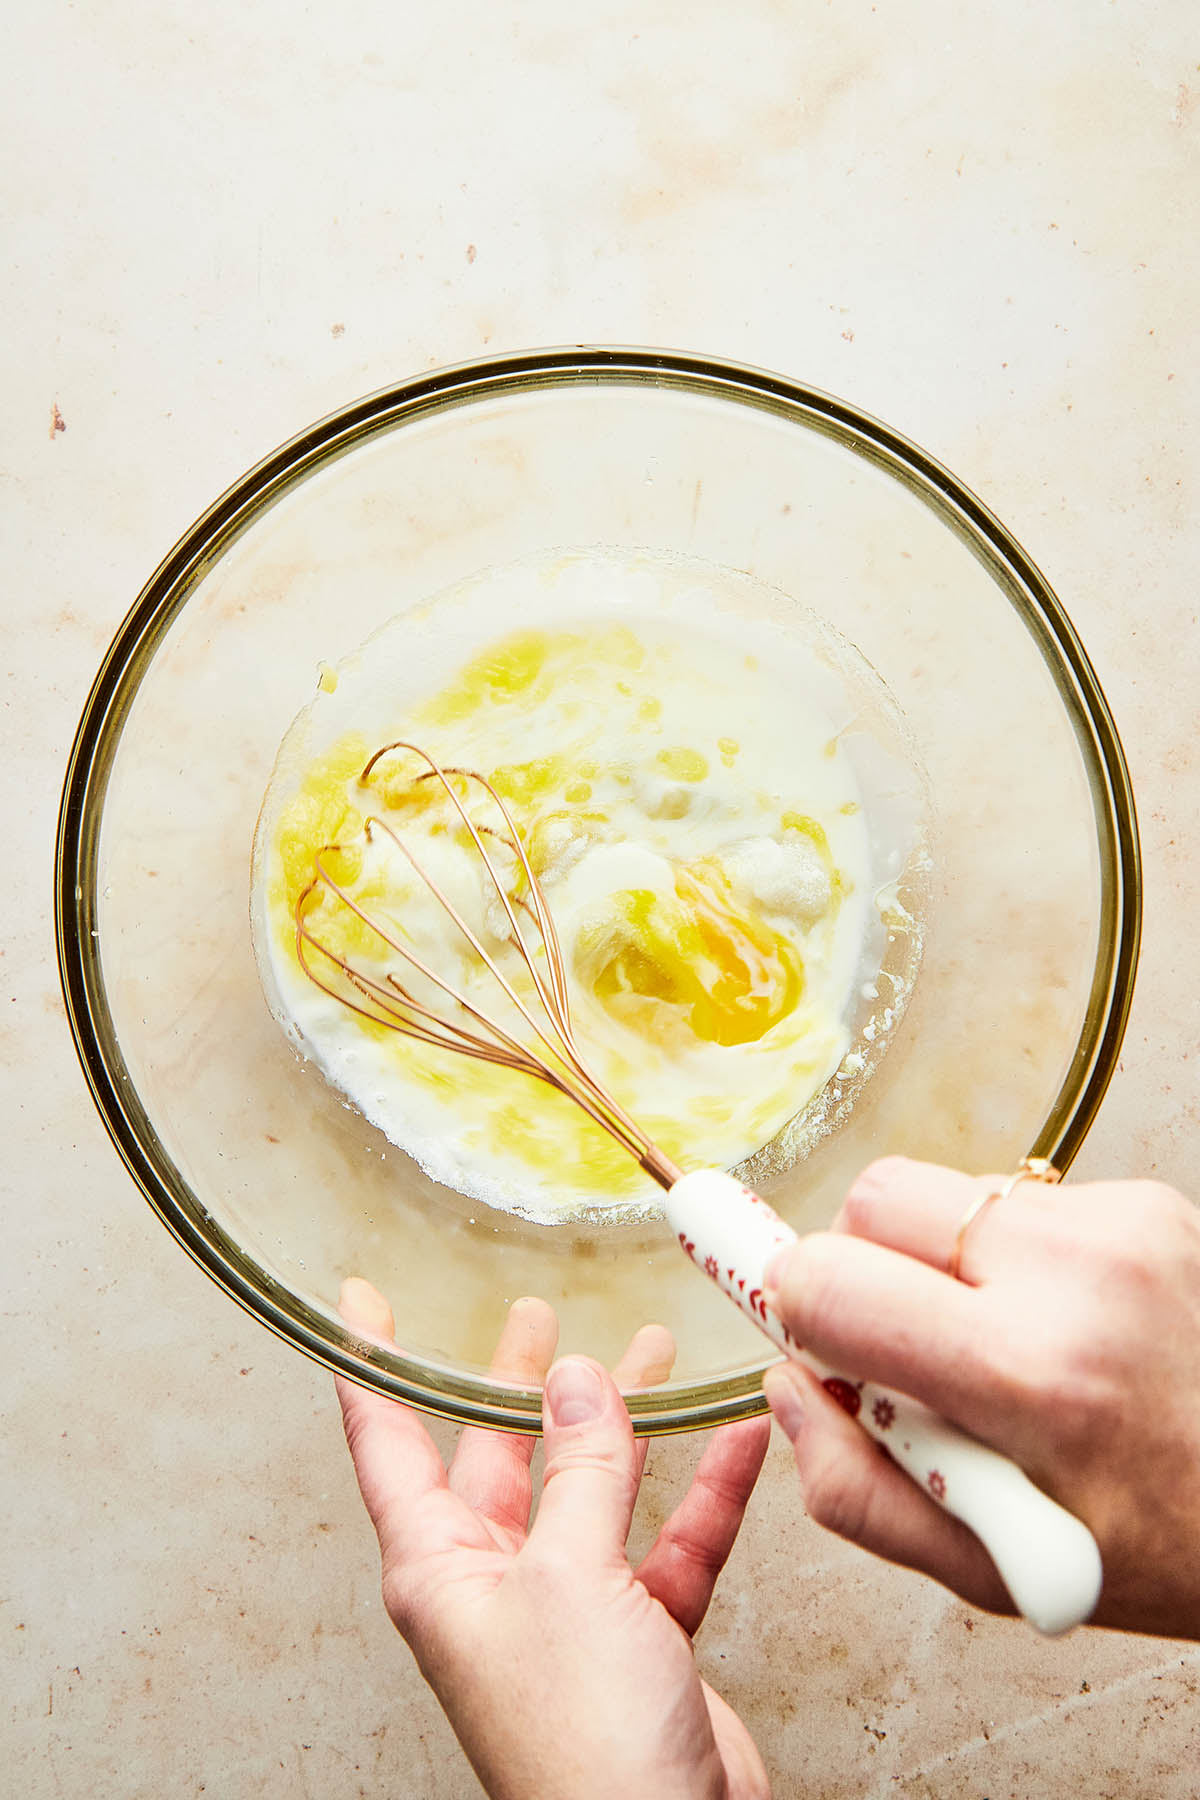 A hand using a whisk to mix wet ingredients together.